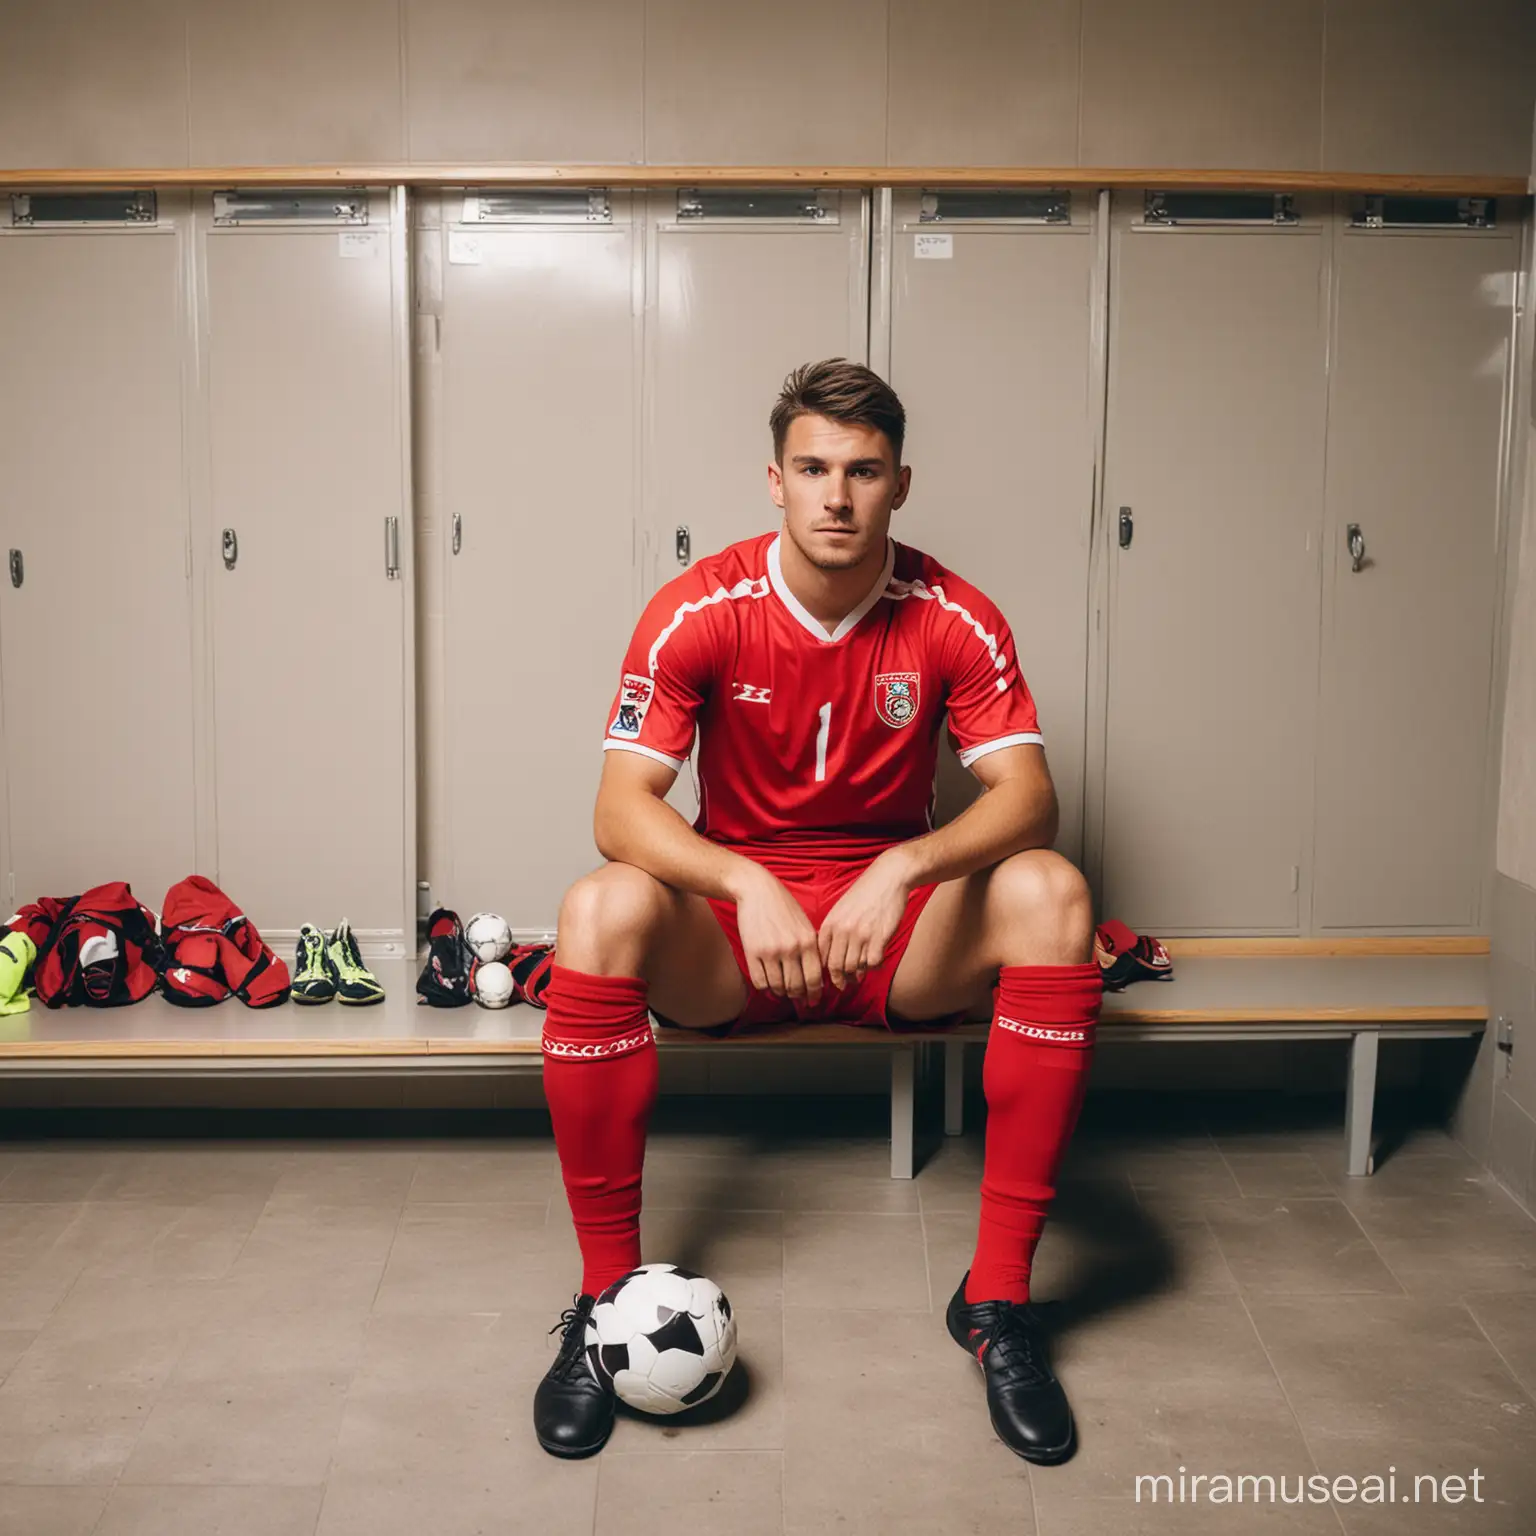 Soccer Player Resting in Changing Room Before Match